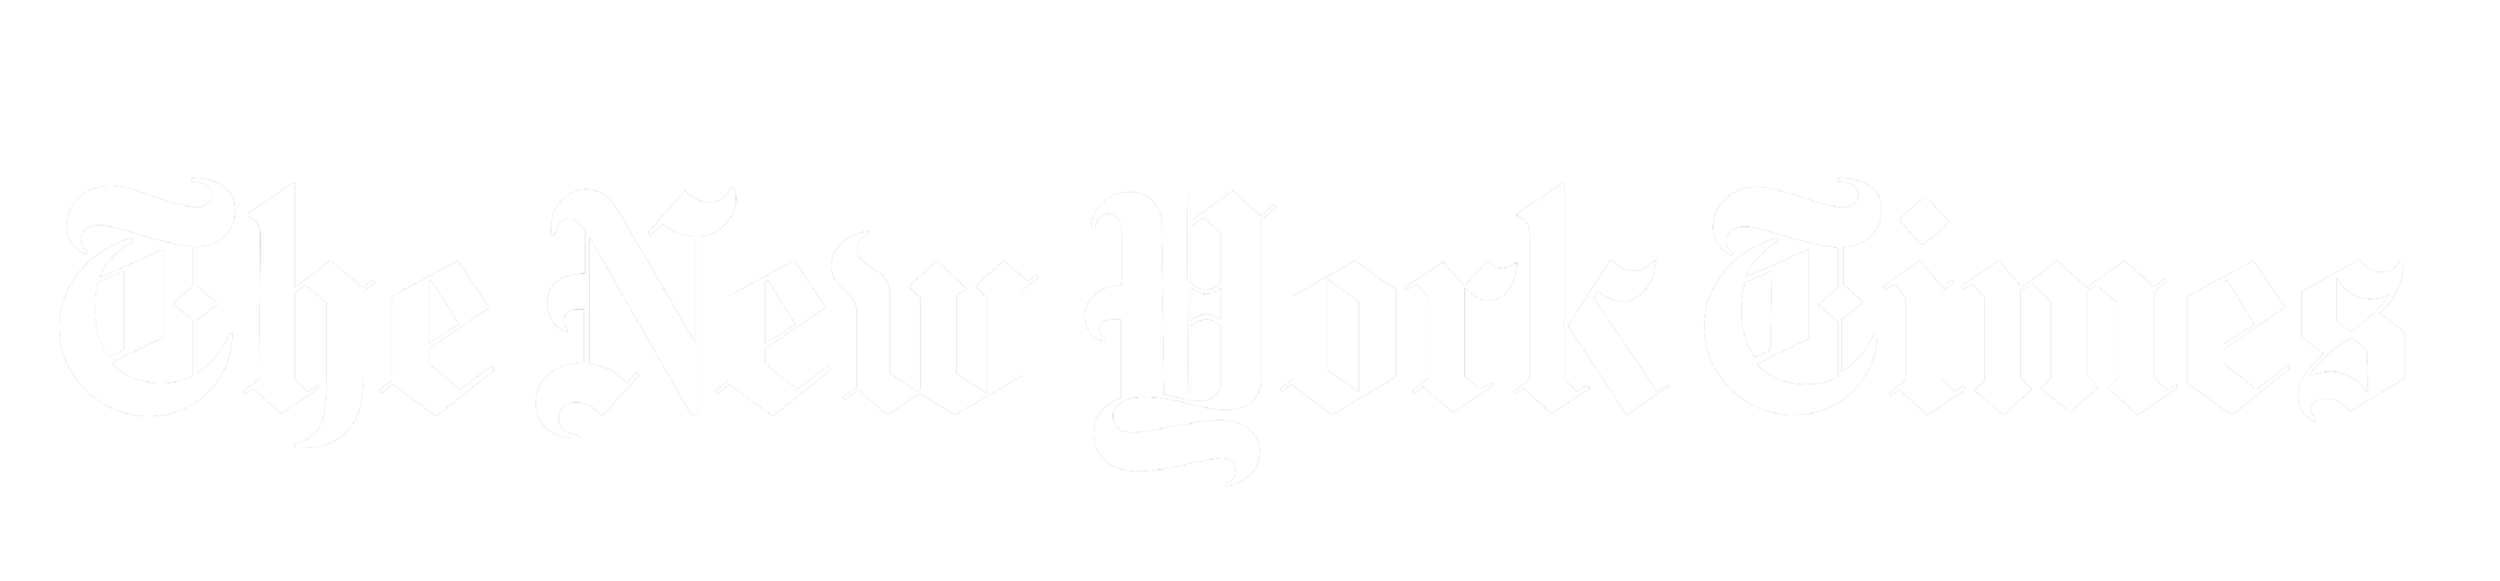 feature-logos-all-WHITE-NYT.png